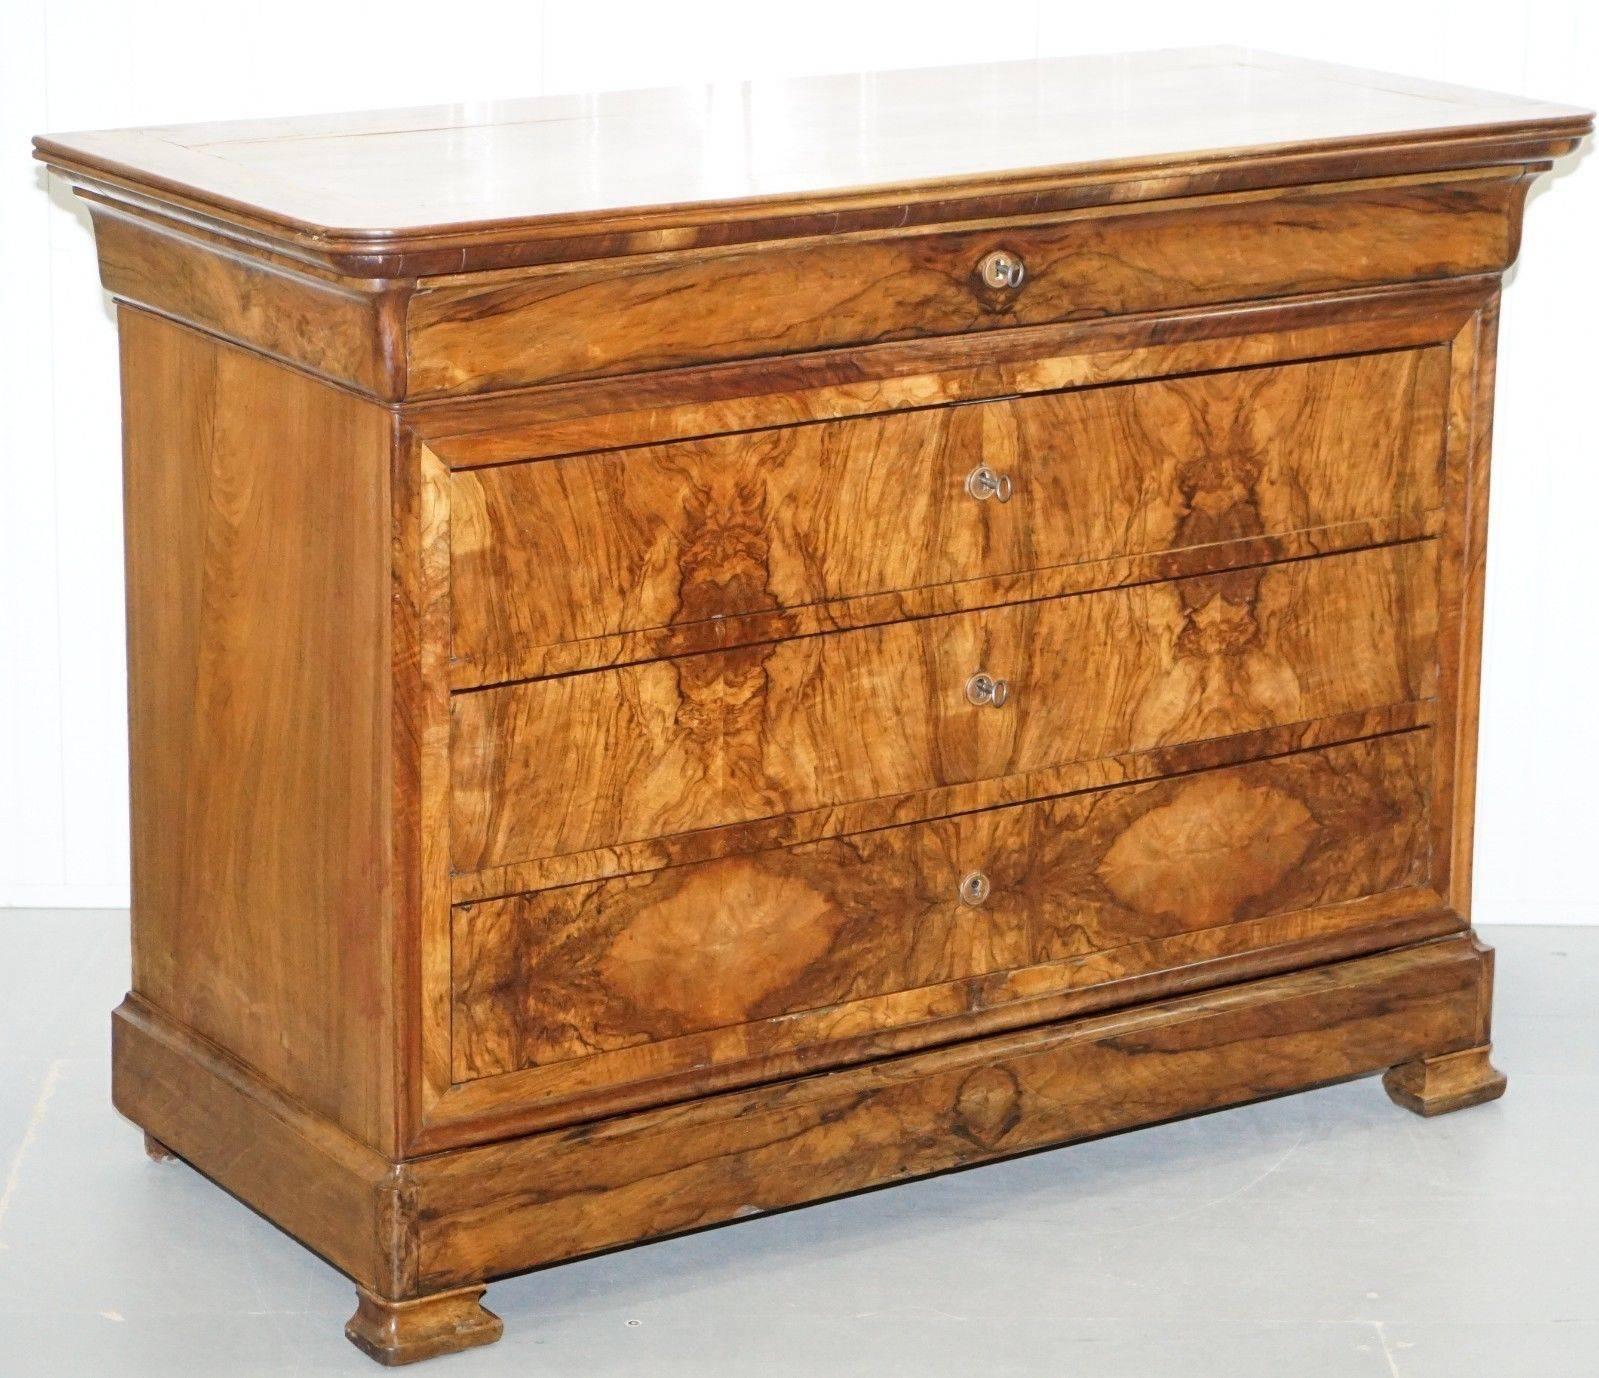 We are delighted to offer for sale this stunning Biedermier flamed walnut chest of drawers, circa 1850

A magnificent looking and well-made piece in lovingly restored condition throughout

The walnut veneer is some of the nicest most premium